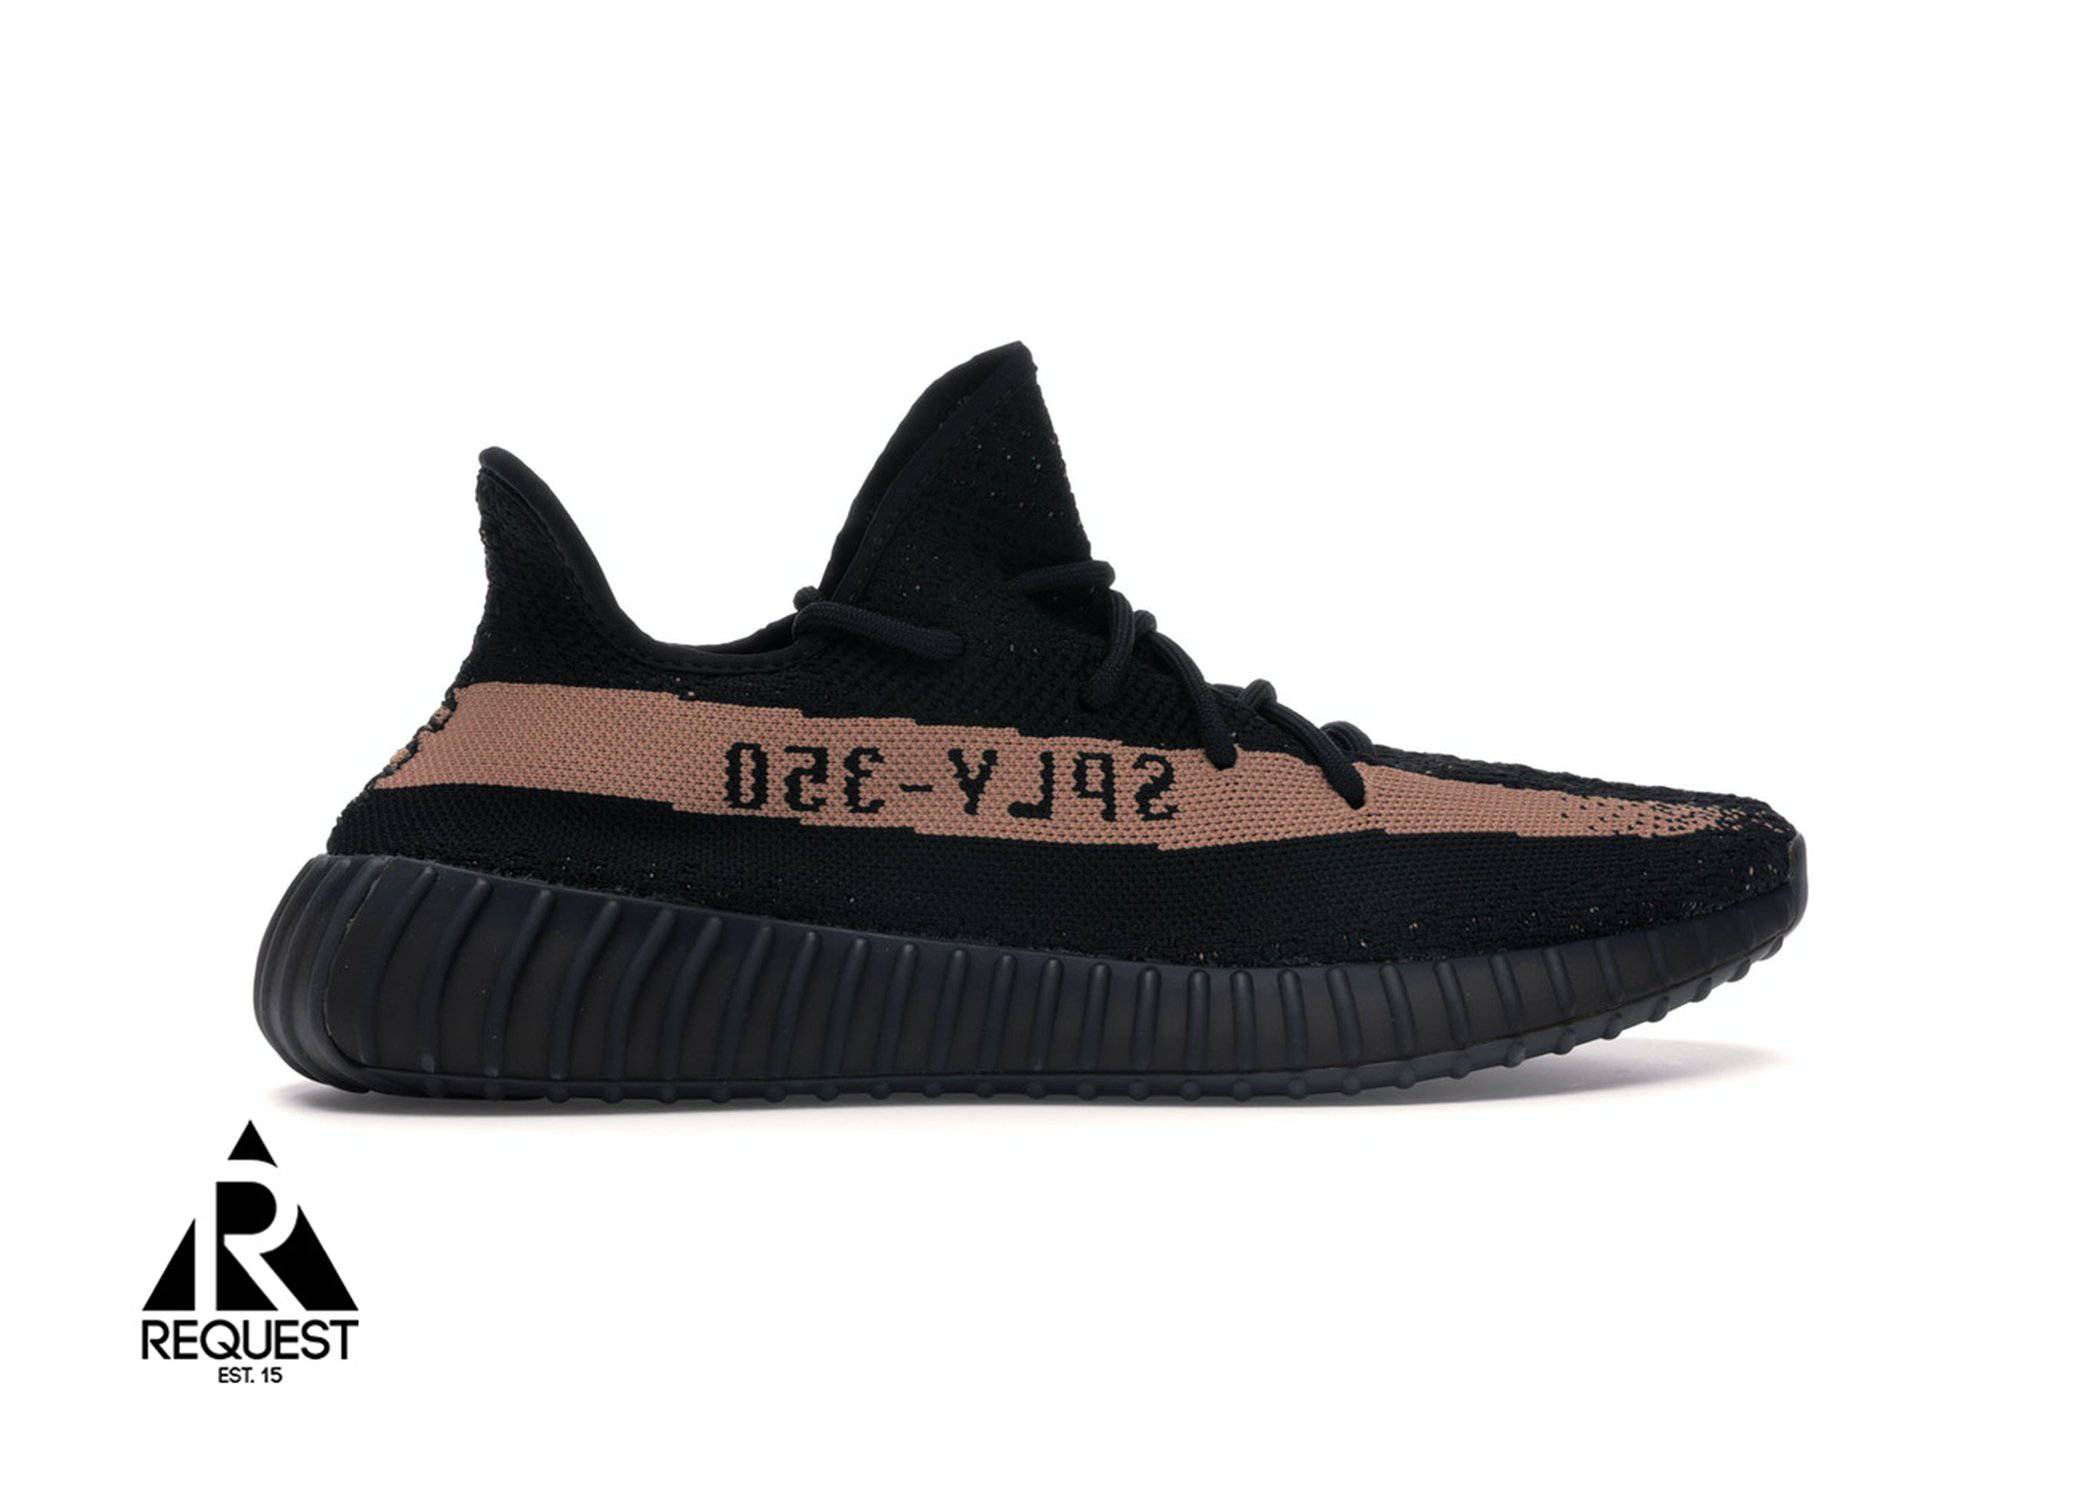 Adidas Yeezy 350 V2 “Copper” | Request